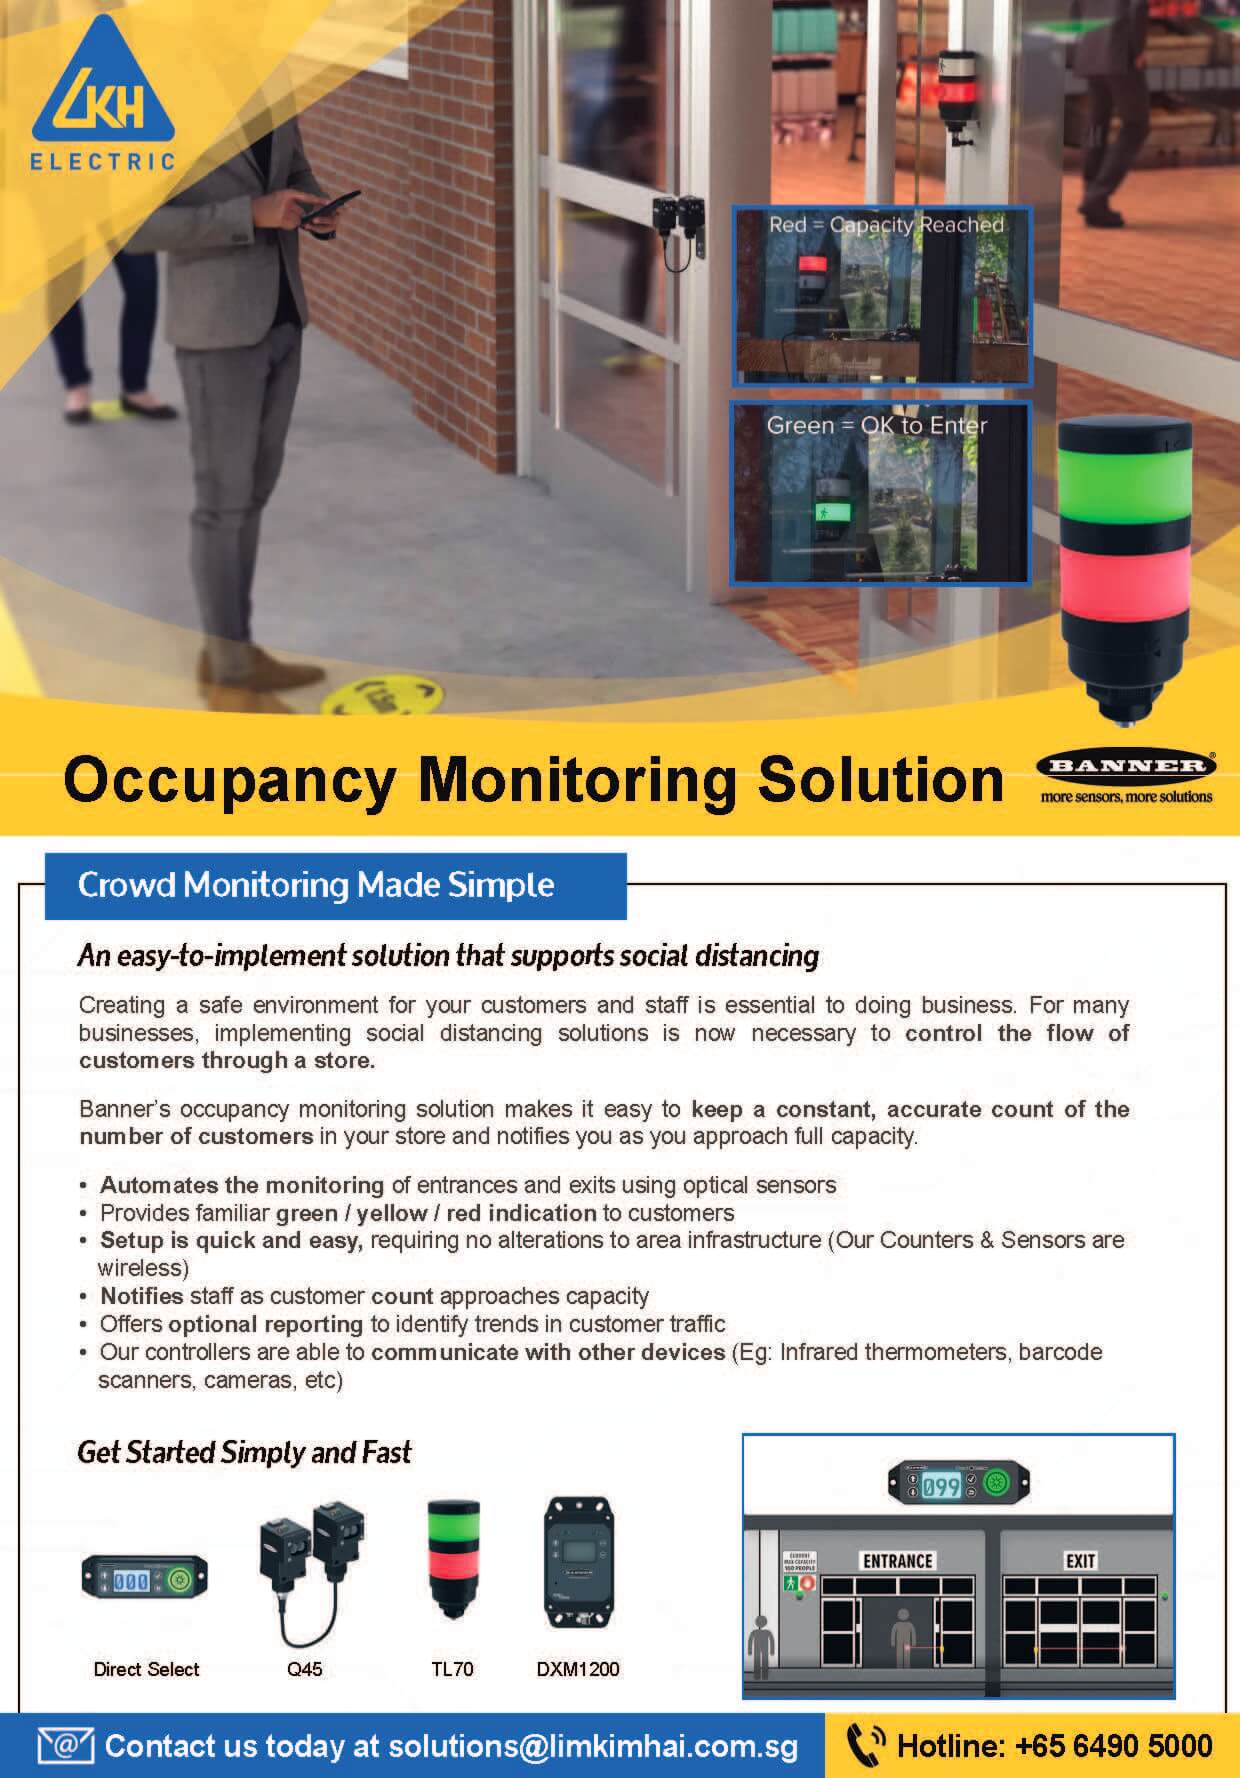 Occupancy Monitoring Solution Brochure